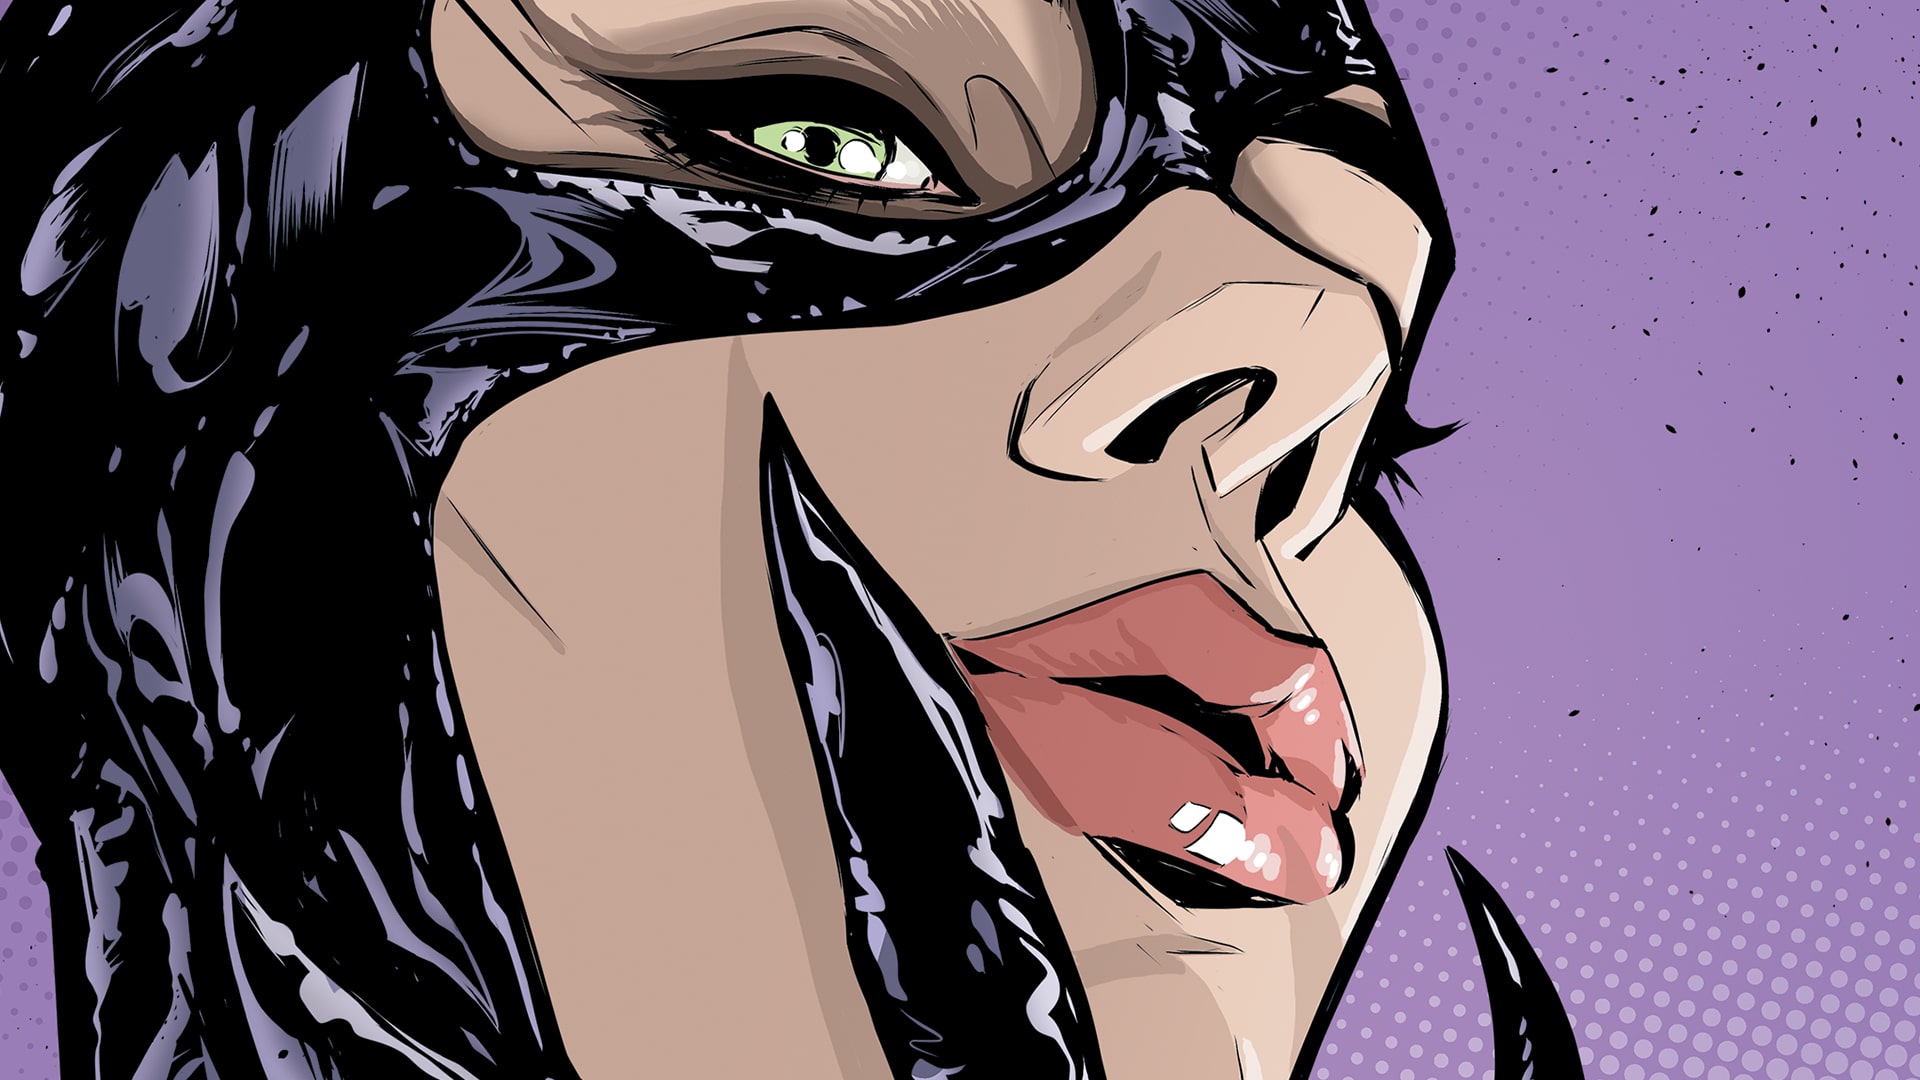 Catwoman #7 review: Paradise is lost when the Penguin comes to town